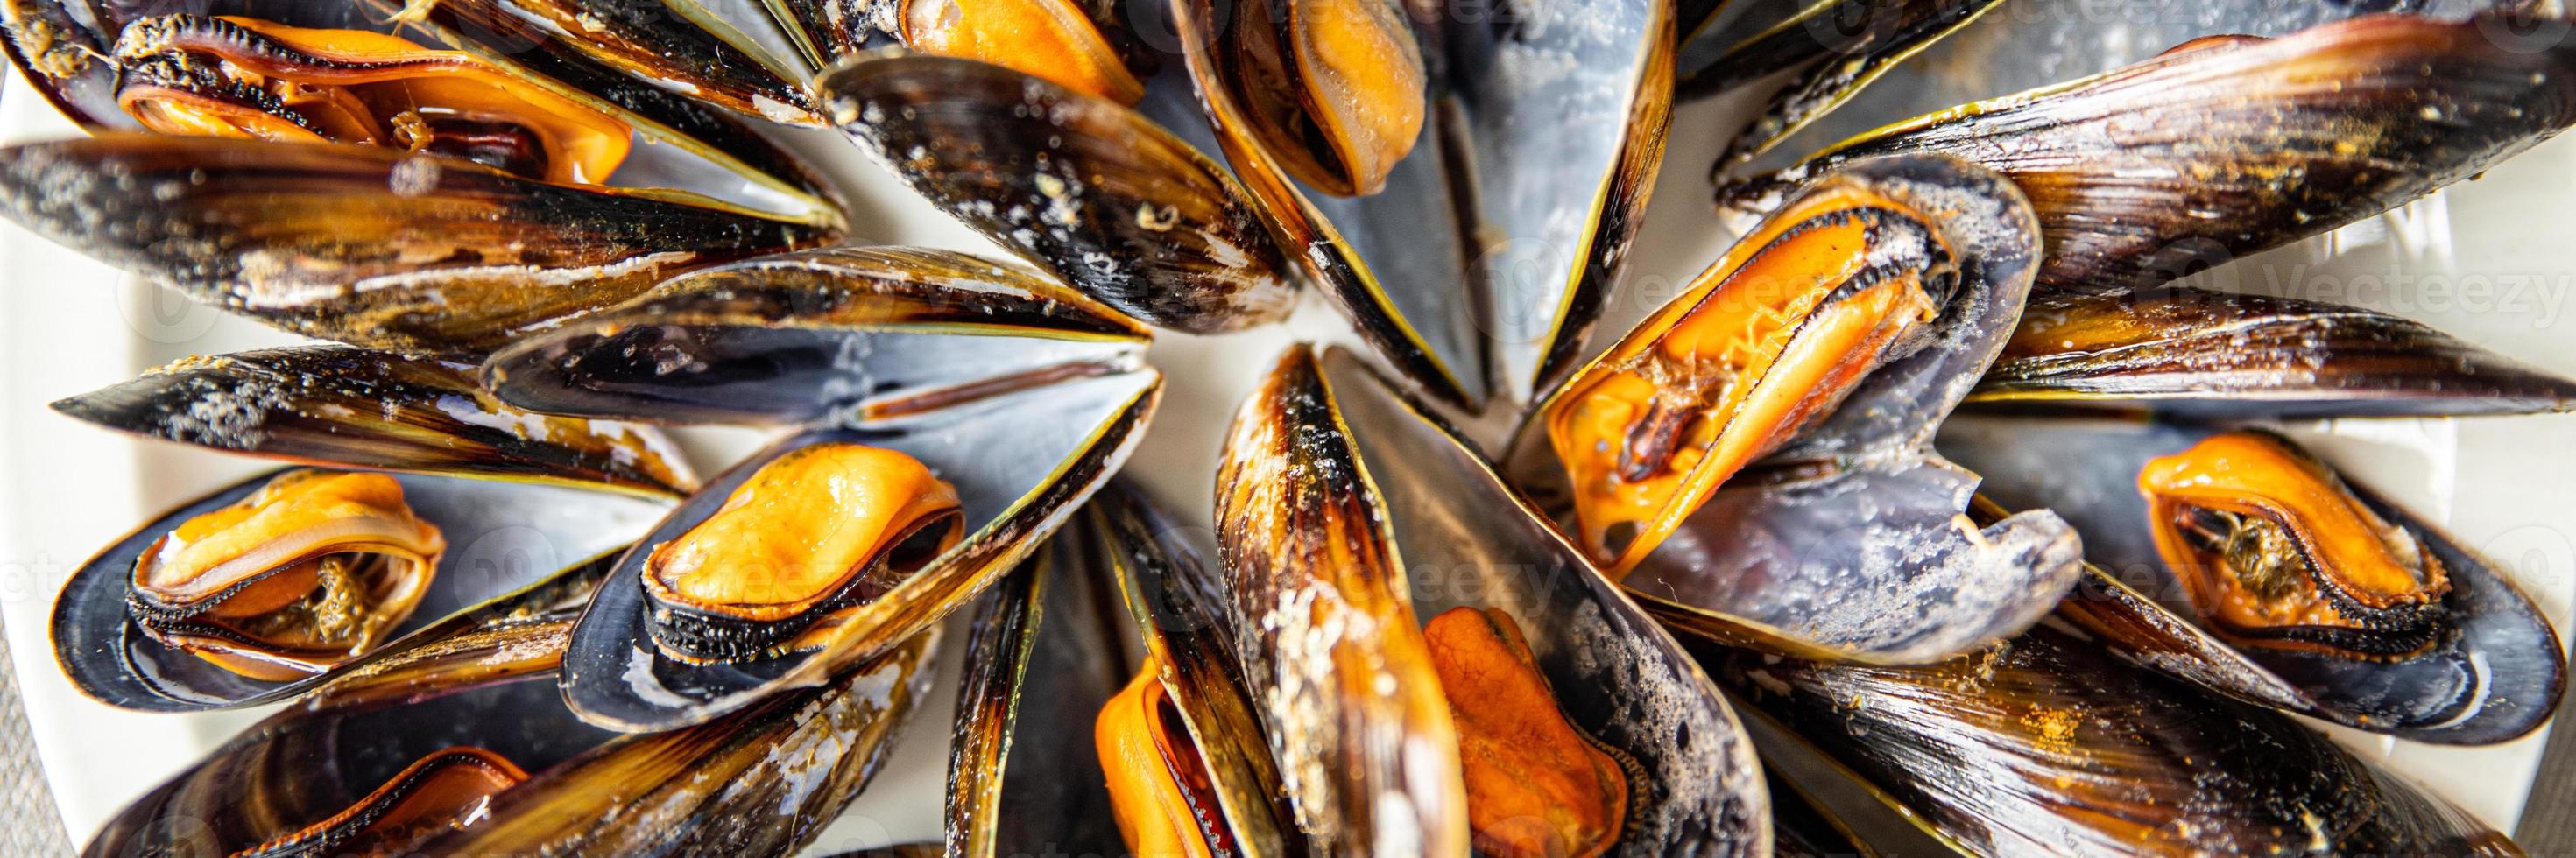 mussels in shells fresh seafood meal on the table copy space food background photo